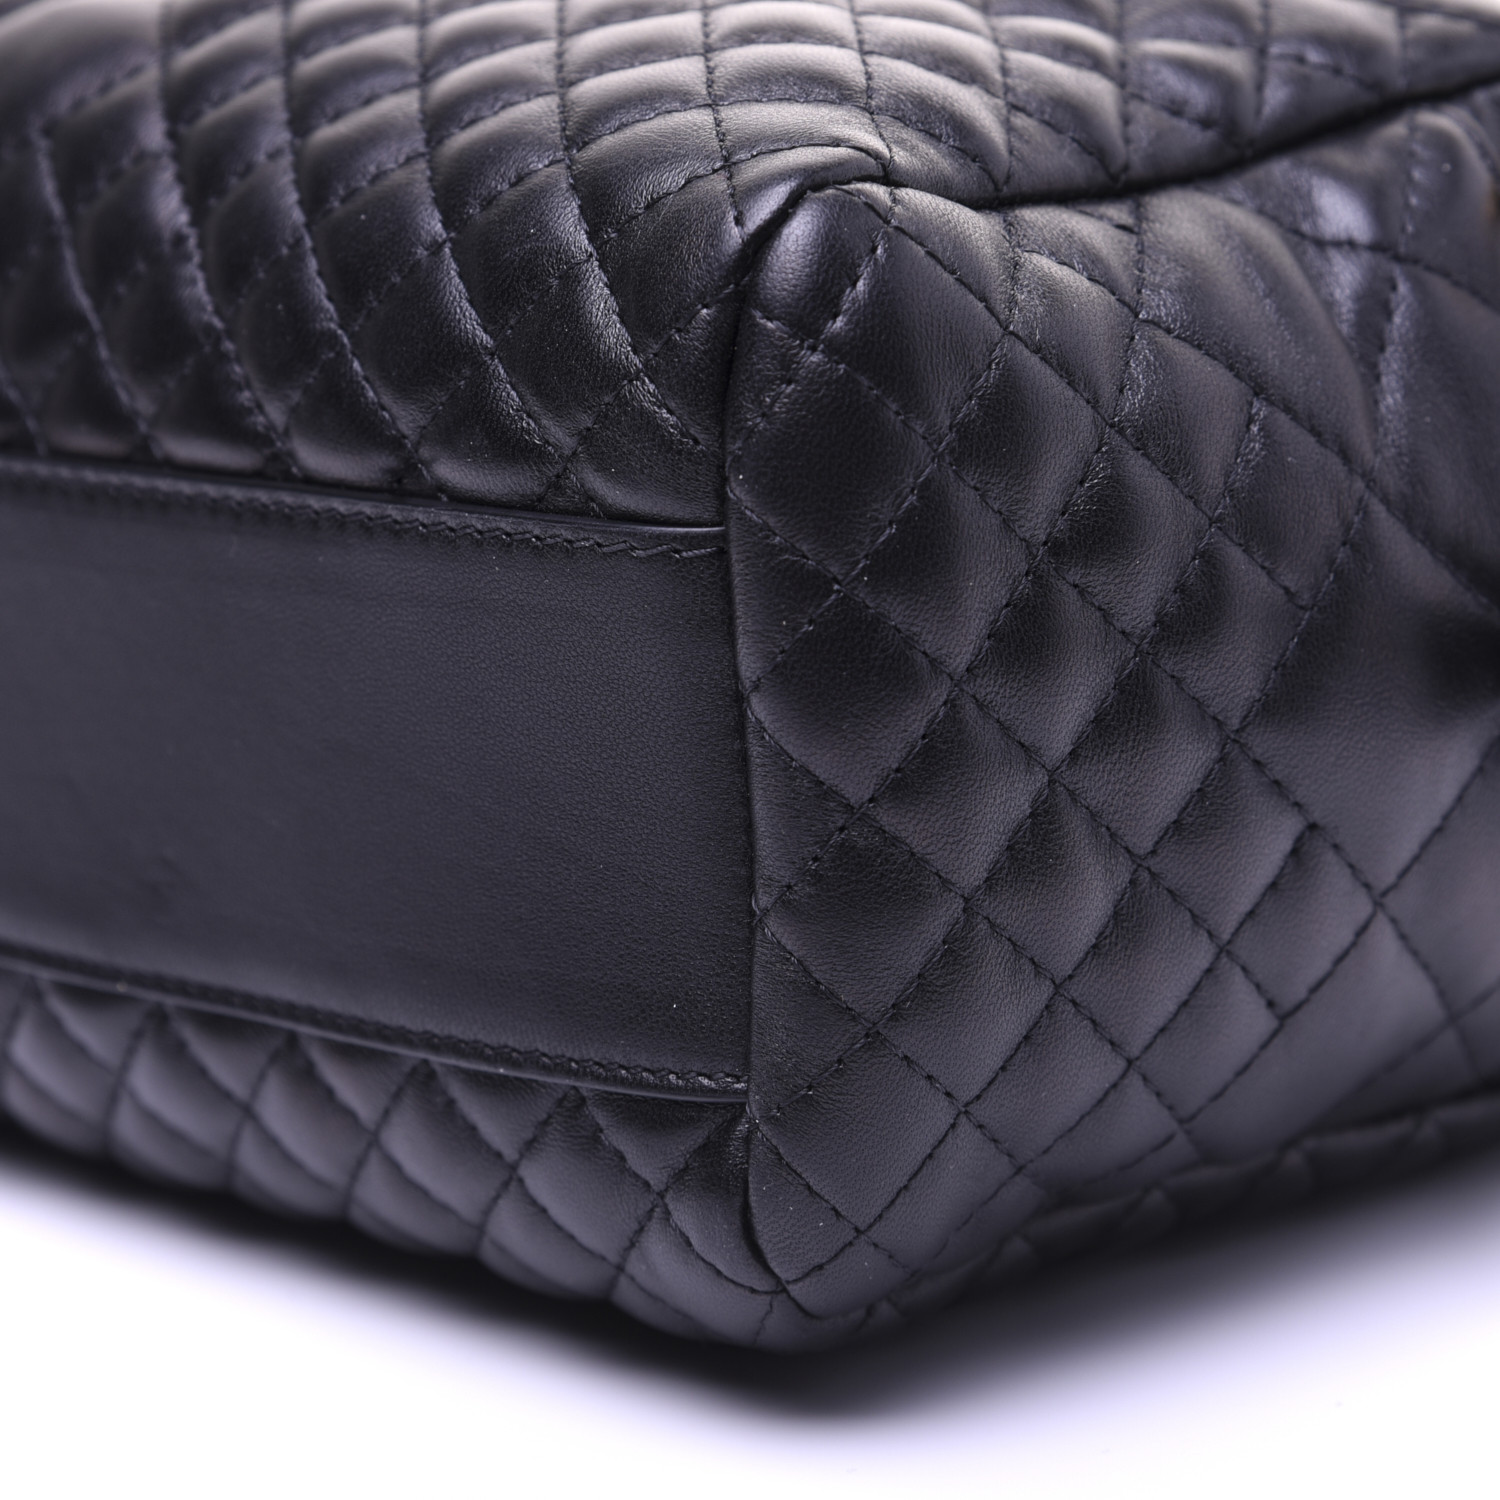 VERSACE Nappa Quilted Icon Bowler Bag Black 683787 | FASHIONPHILE